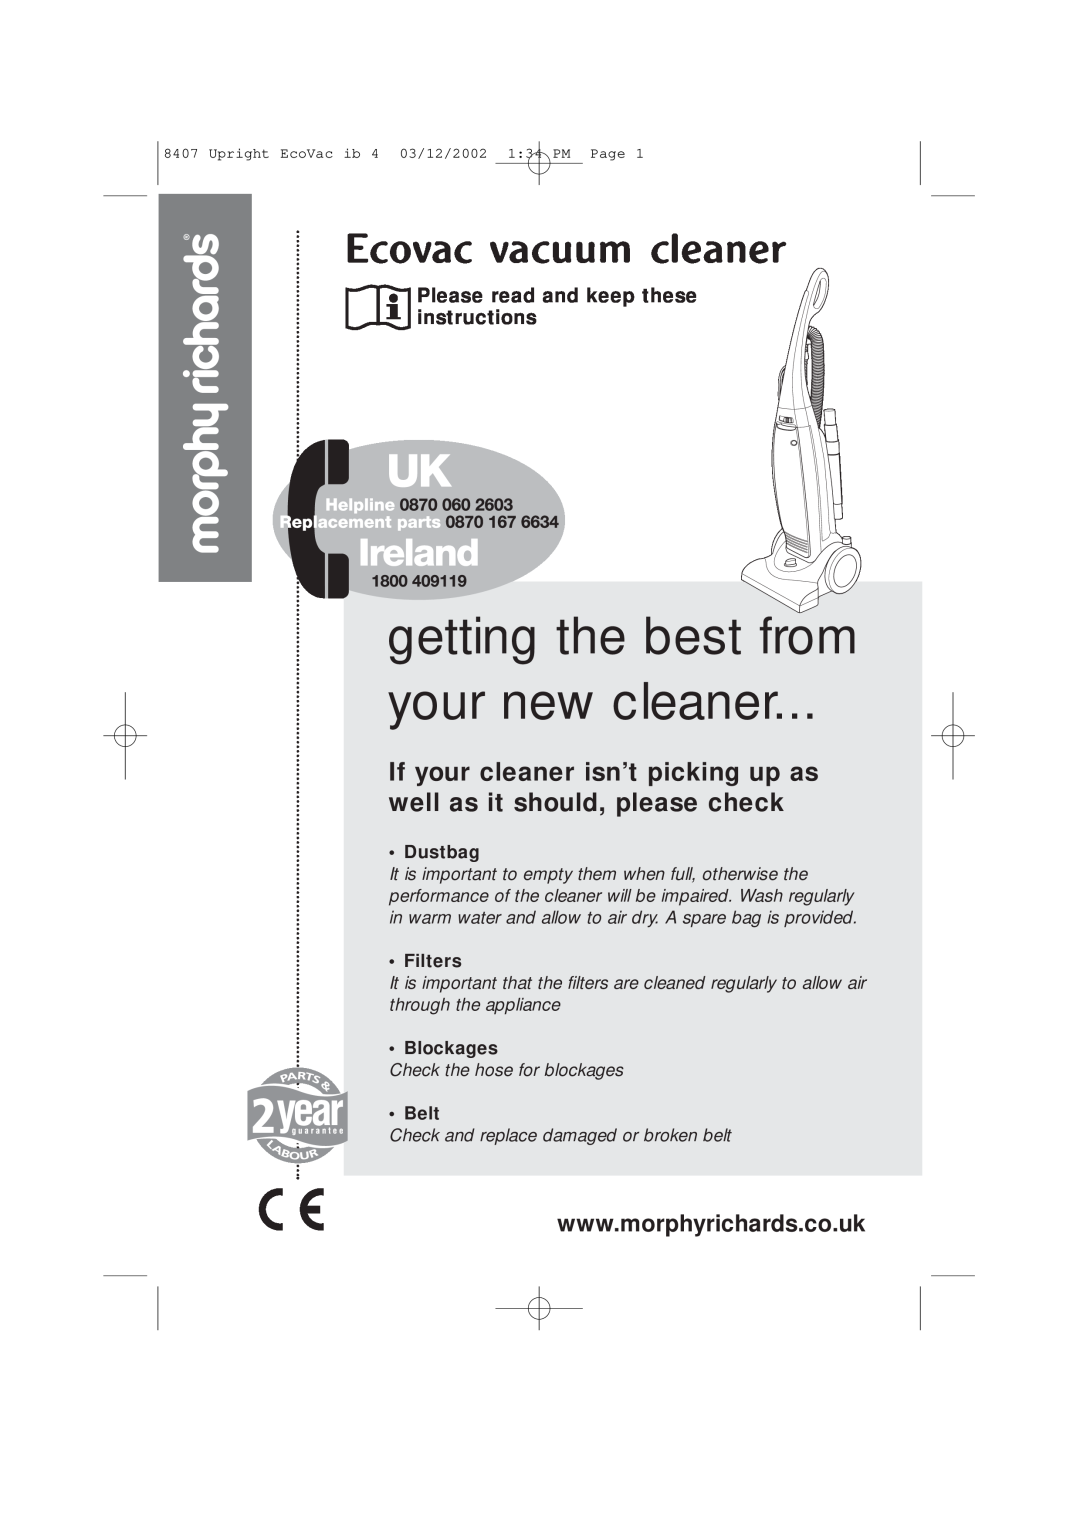 Morphy Richards Ecovac vacuum cleaner manual Please read and keep these instructions, Dustbag, Filters, Blockages, Belt 